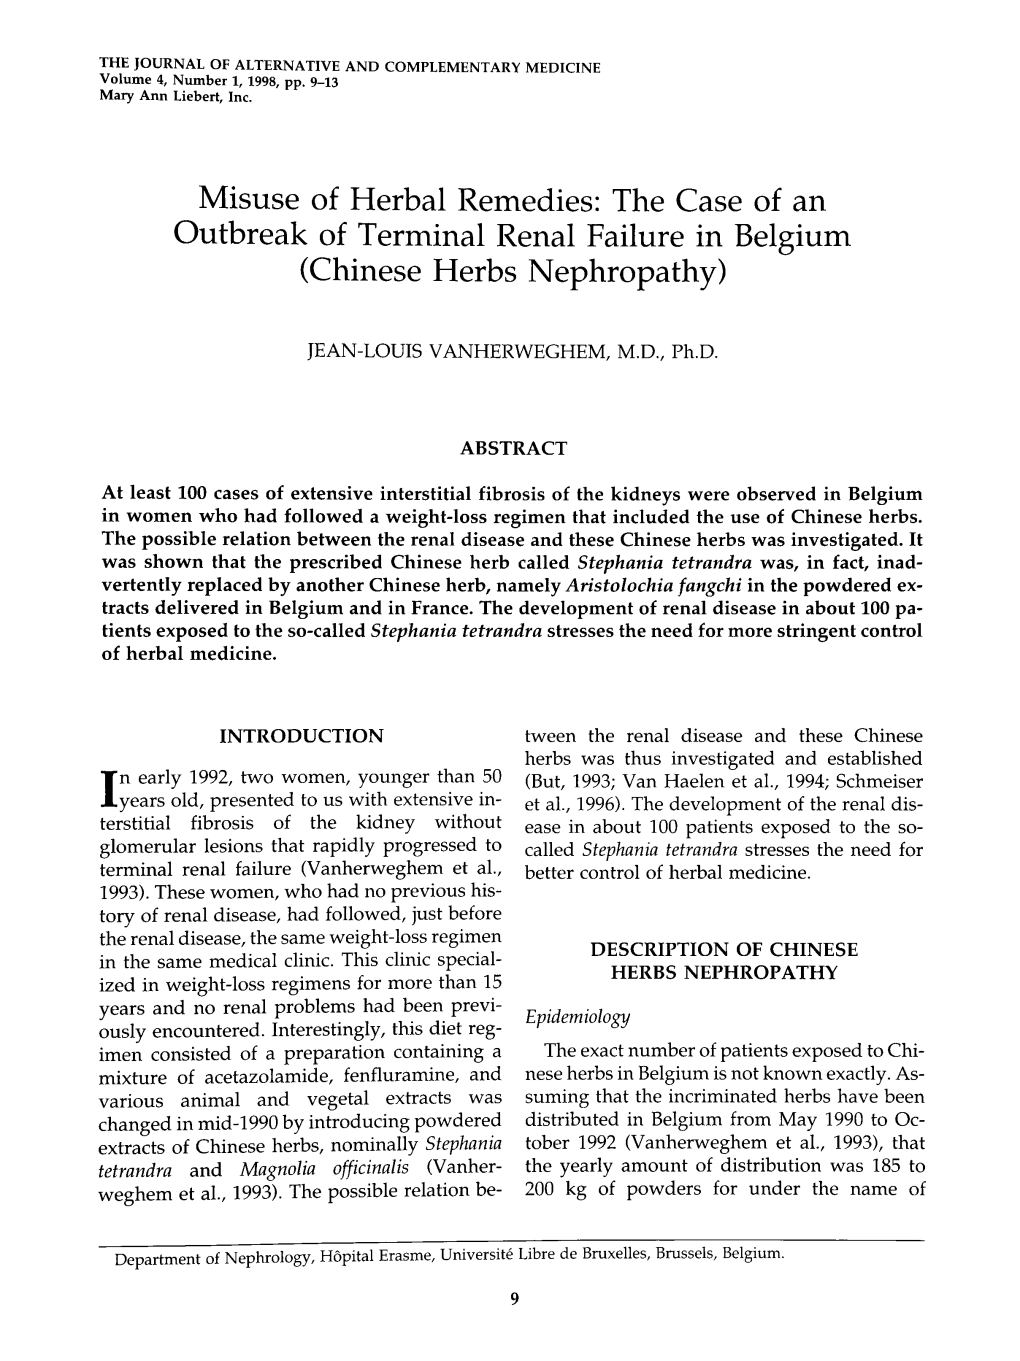 Misuse of Herbal Remedies: the Case of an Outbreak of Terminal Renal Failure in Belgium